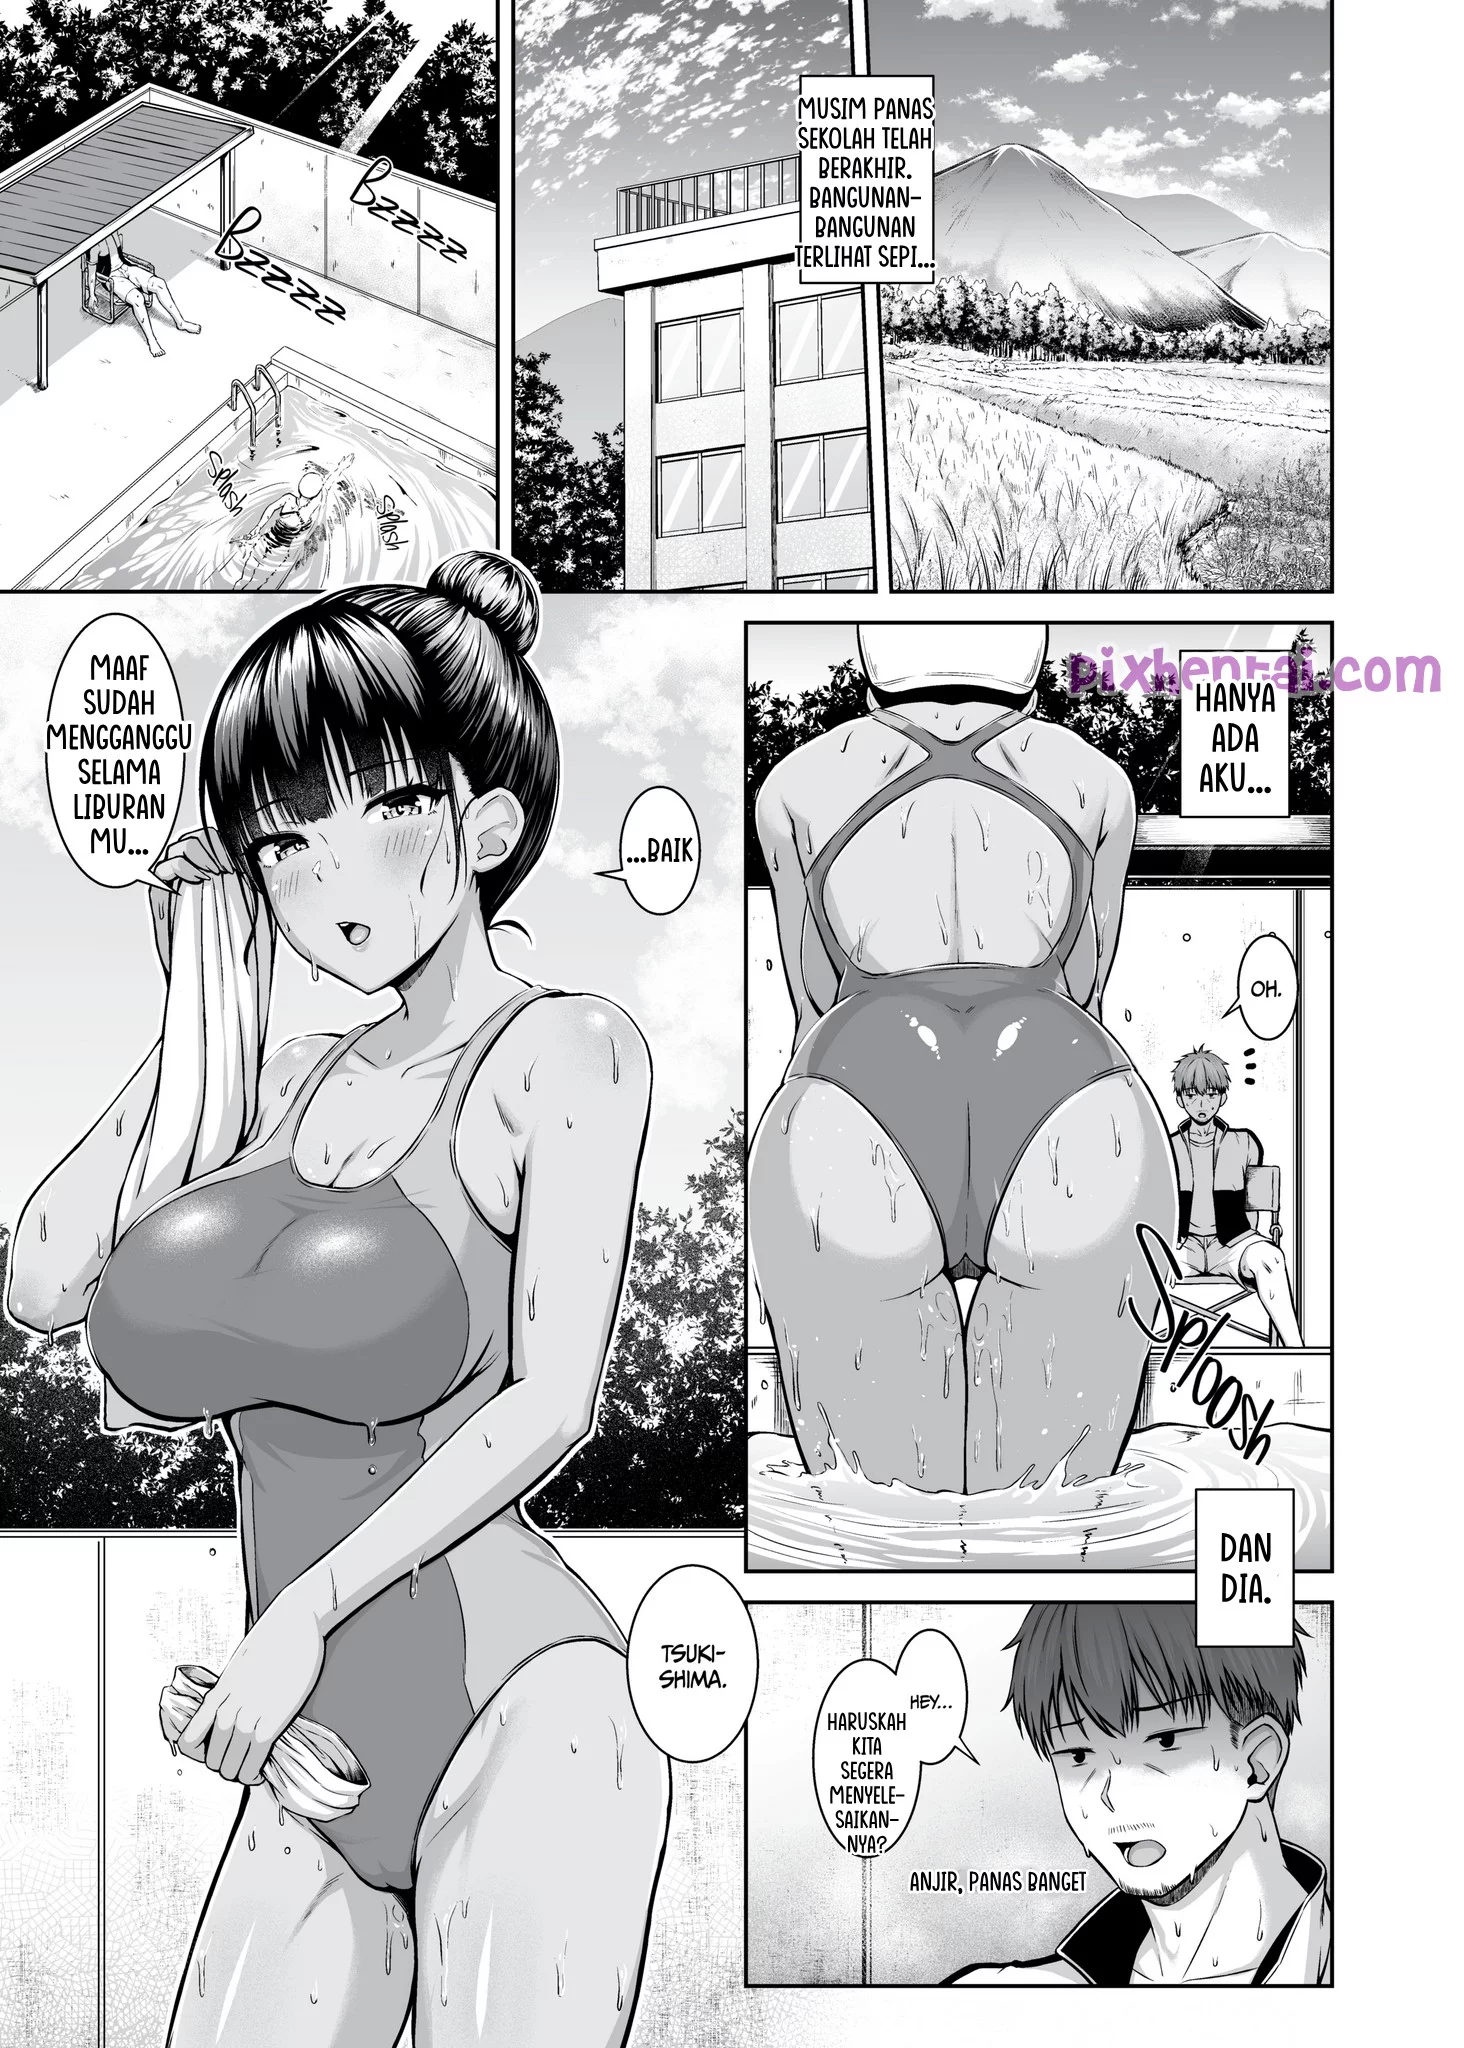 Komik hentai xxx manga sex bokep The Cool Beauty from the Swim Club is Mad about Sex 2